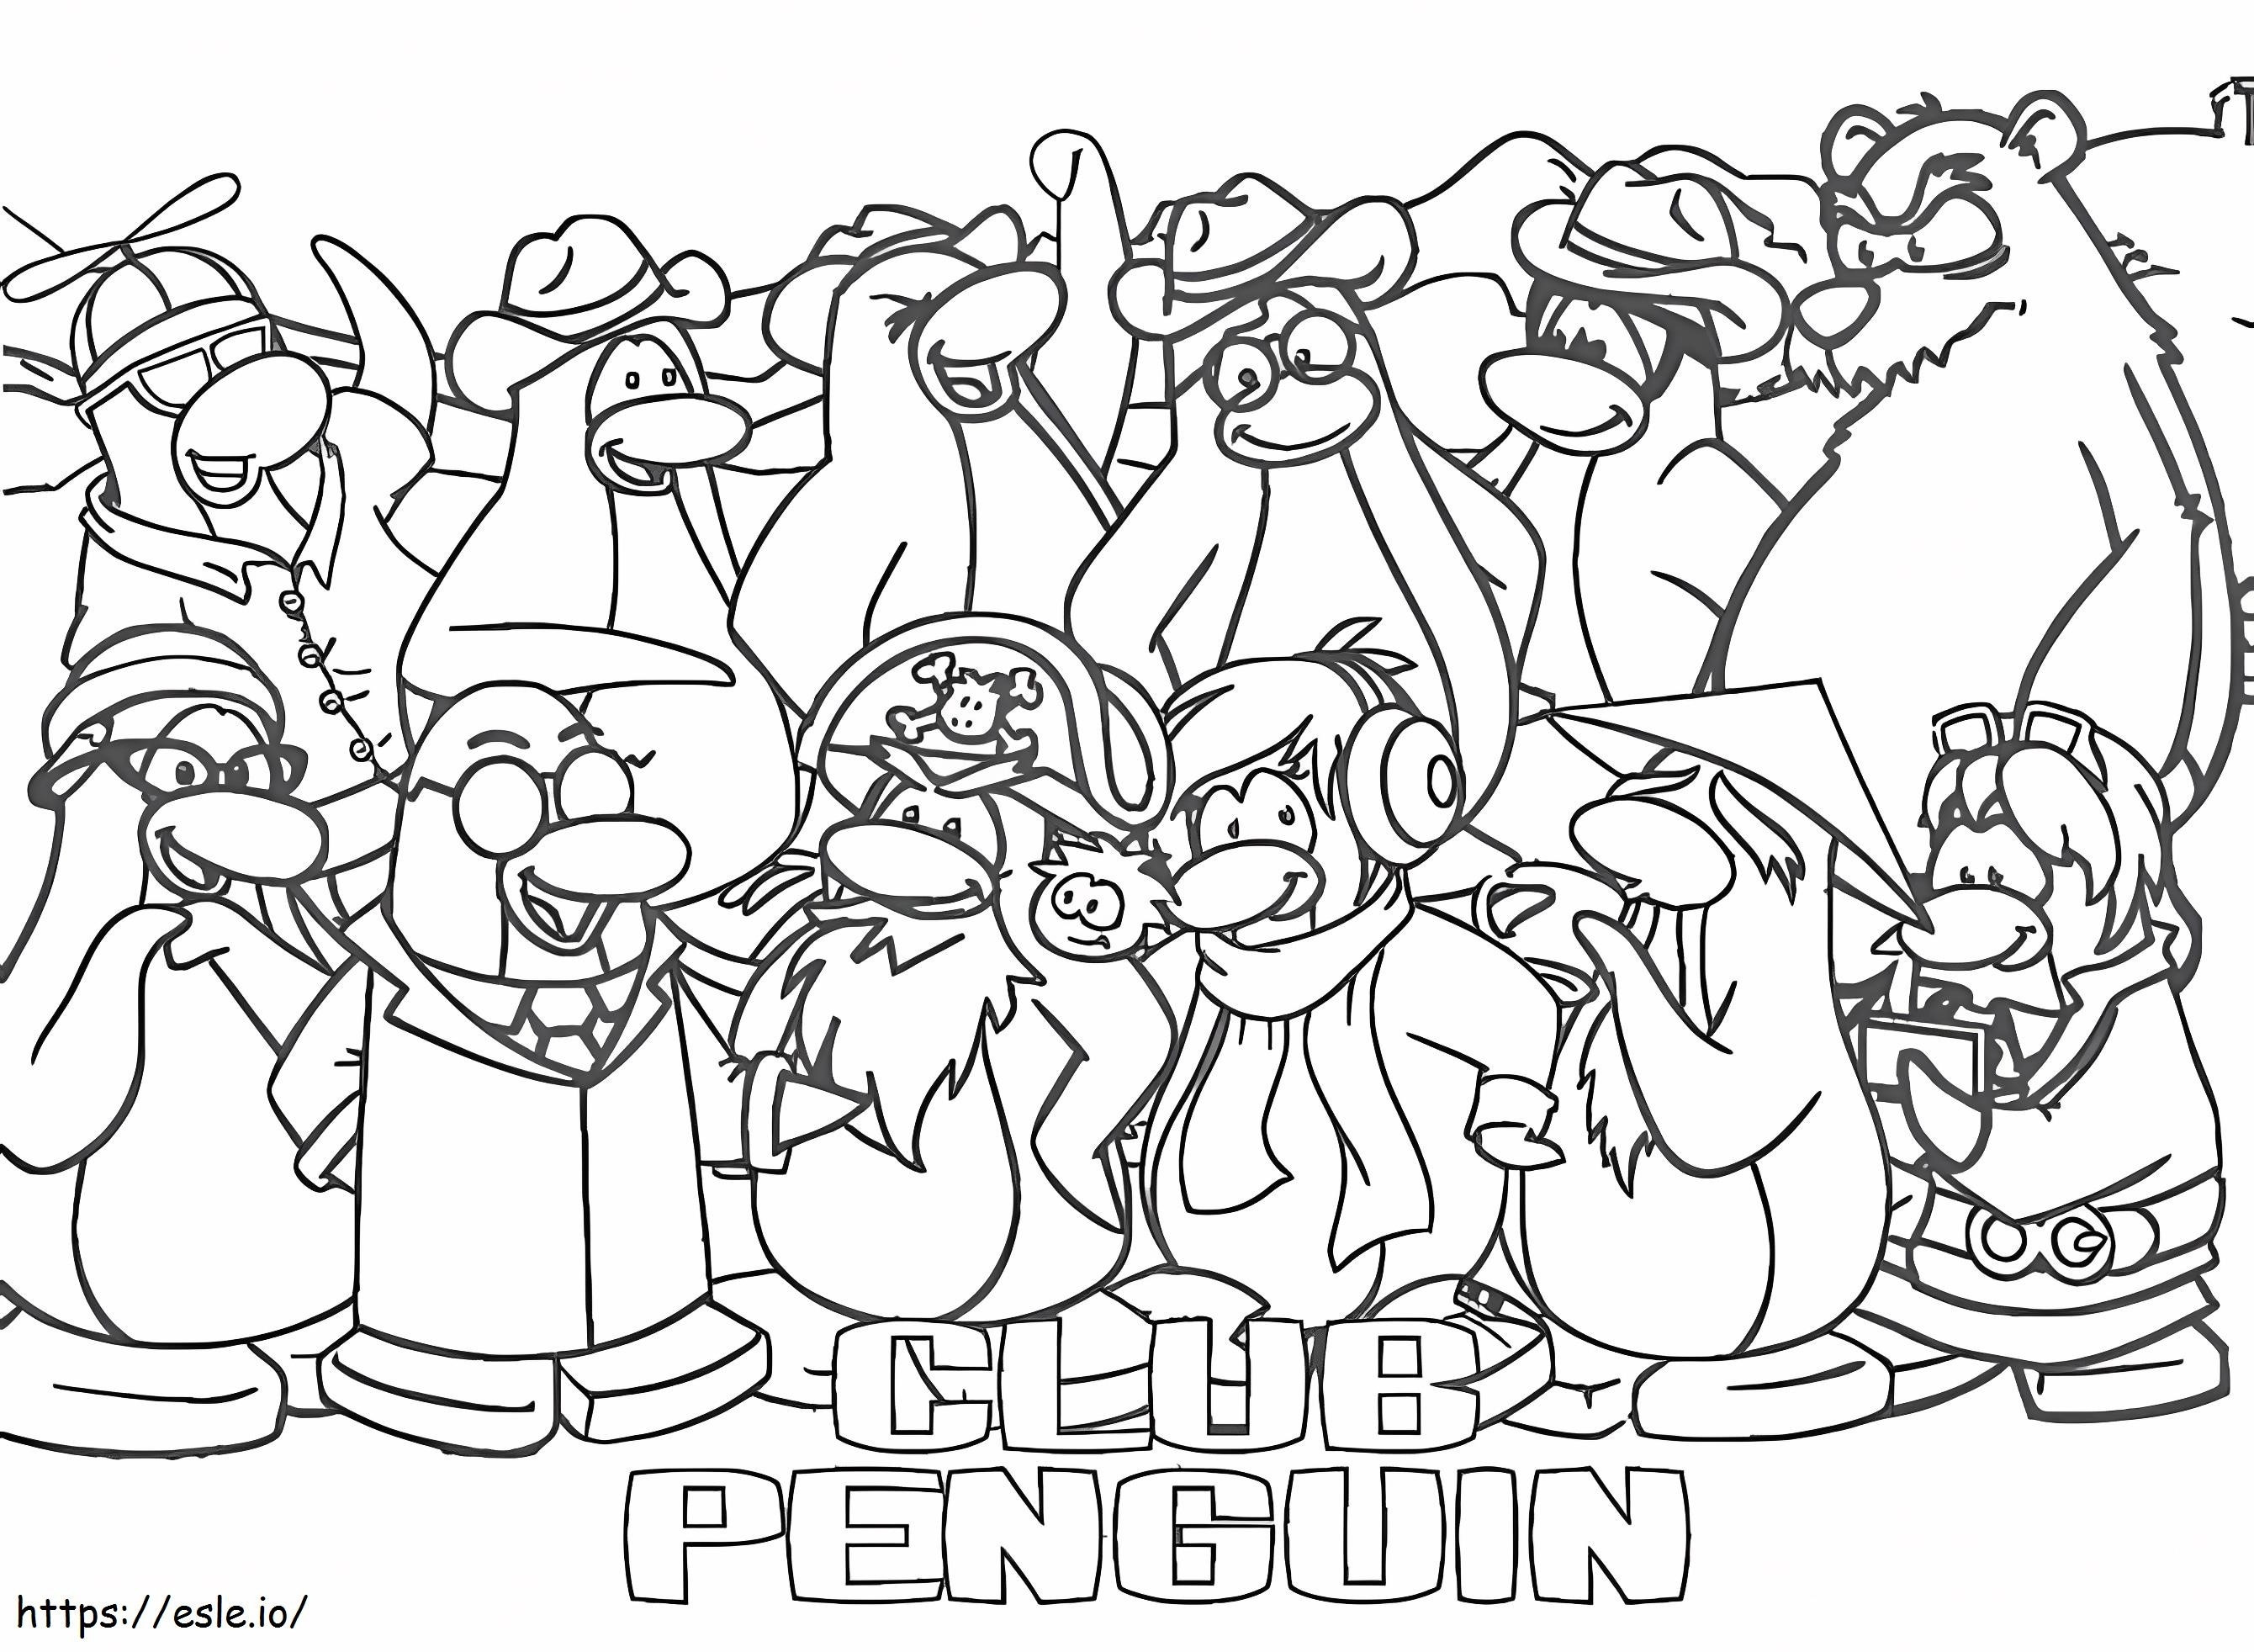 Club Penguin 11 coloring page